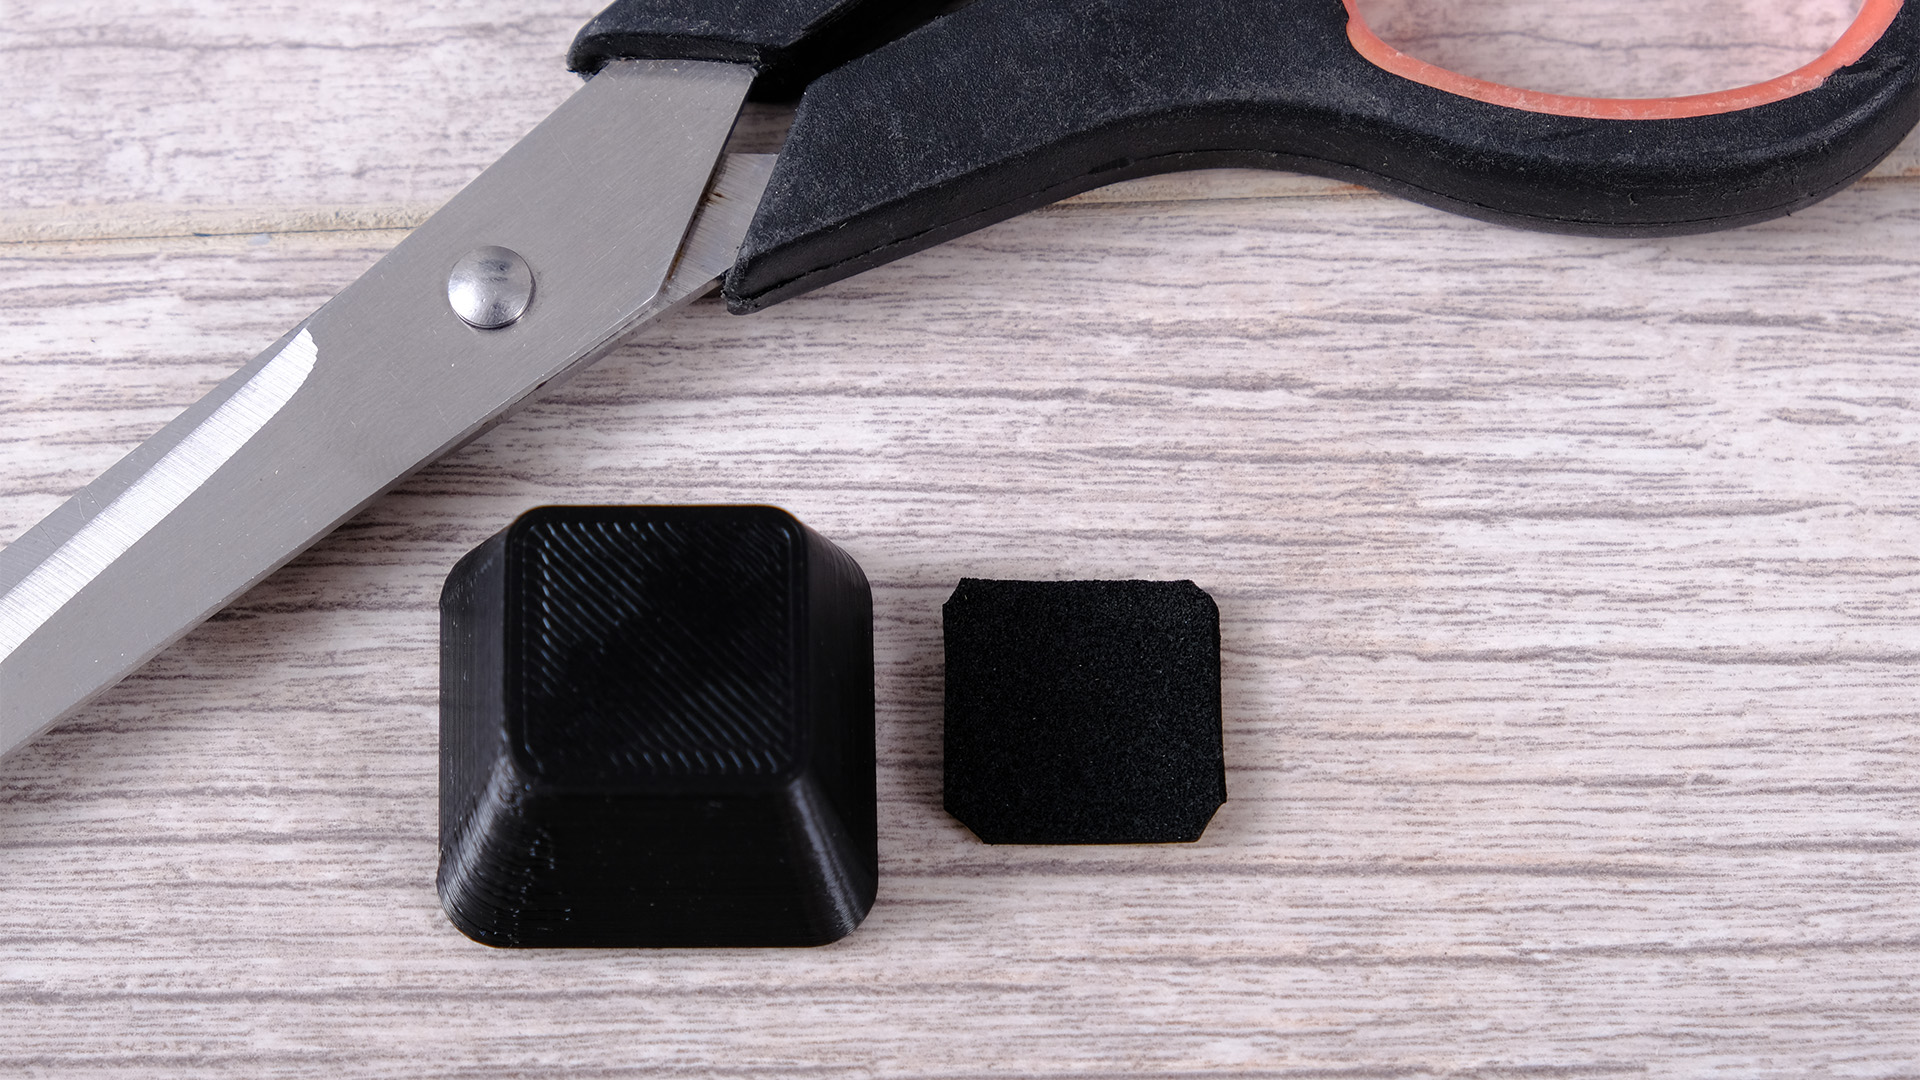 3D print case feet: cut rubber pad to size